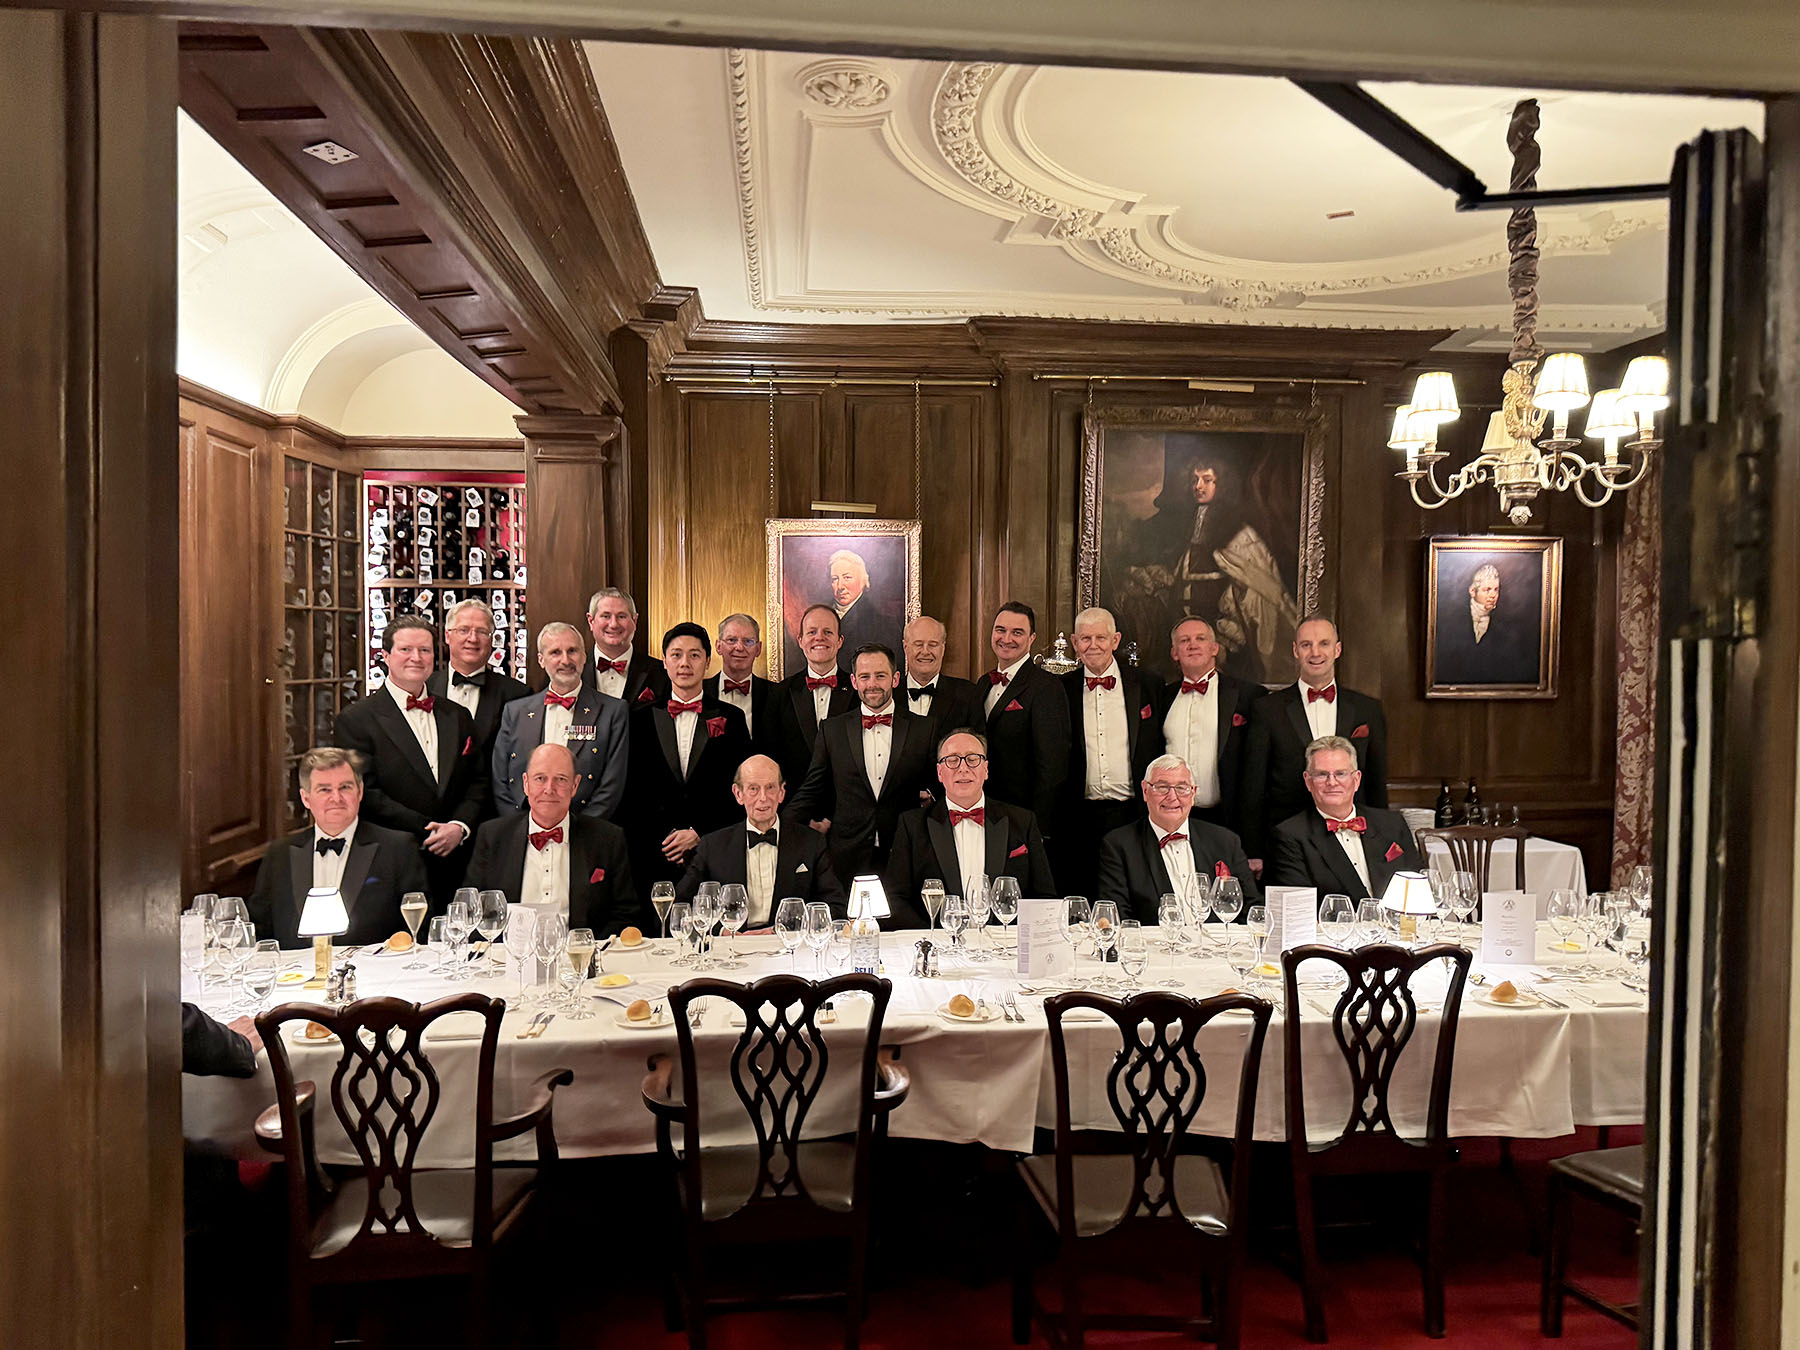 The Board of Grand Stewards (W. Bro Geoff Whale featured) dine out with Grand Master H.R.H. the Duke of Kent